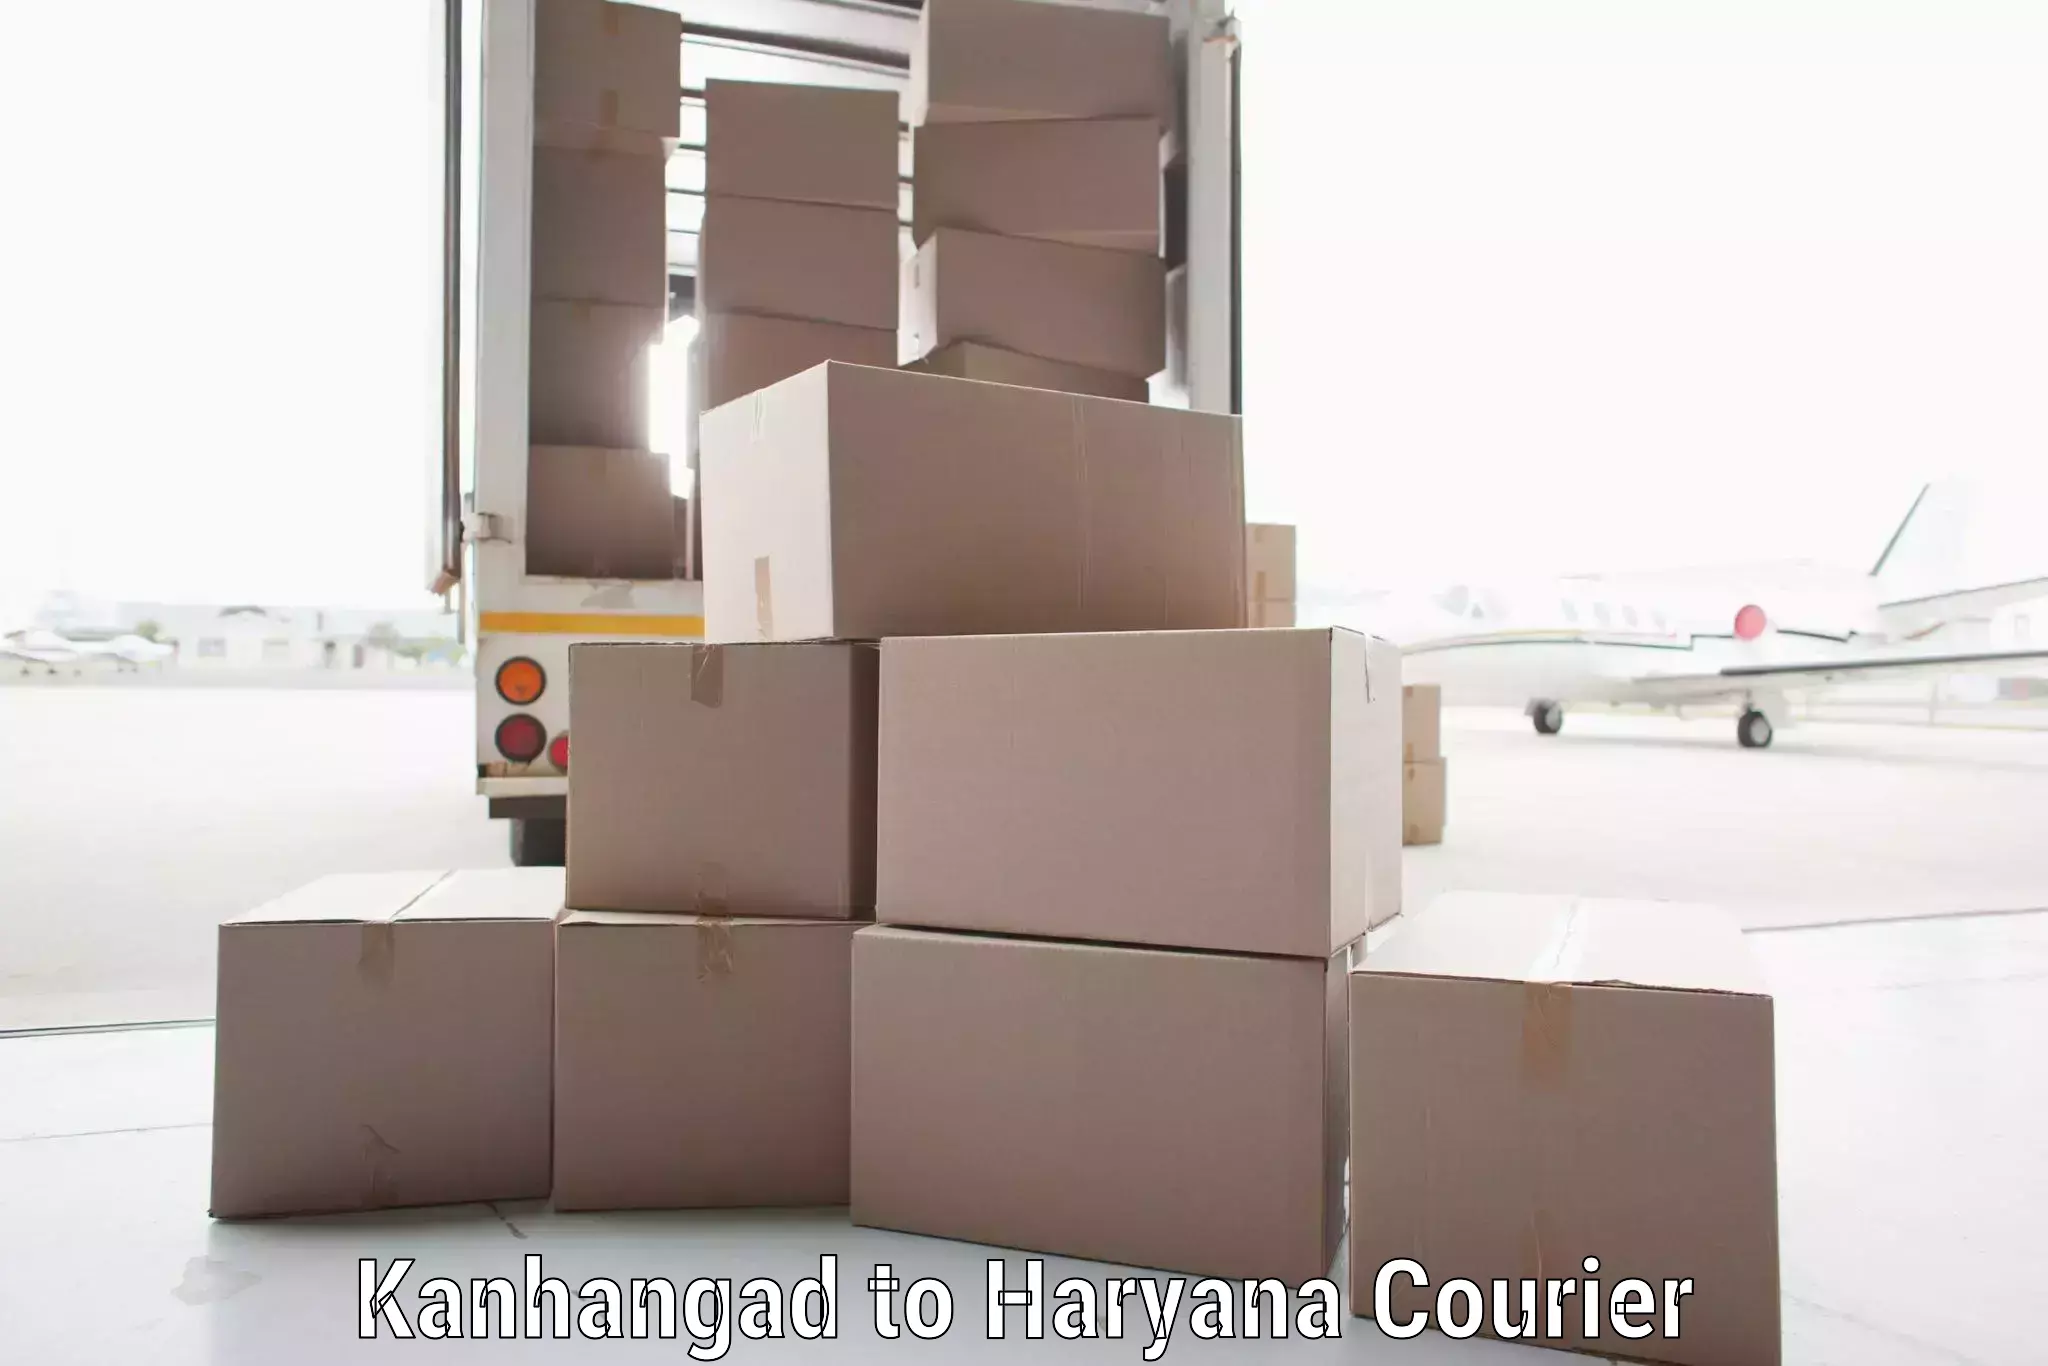 On-demand shipping options in Kanhangad to NCR Haryana